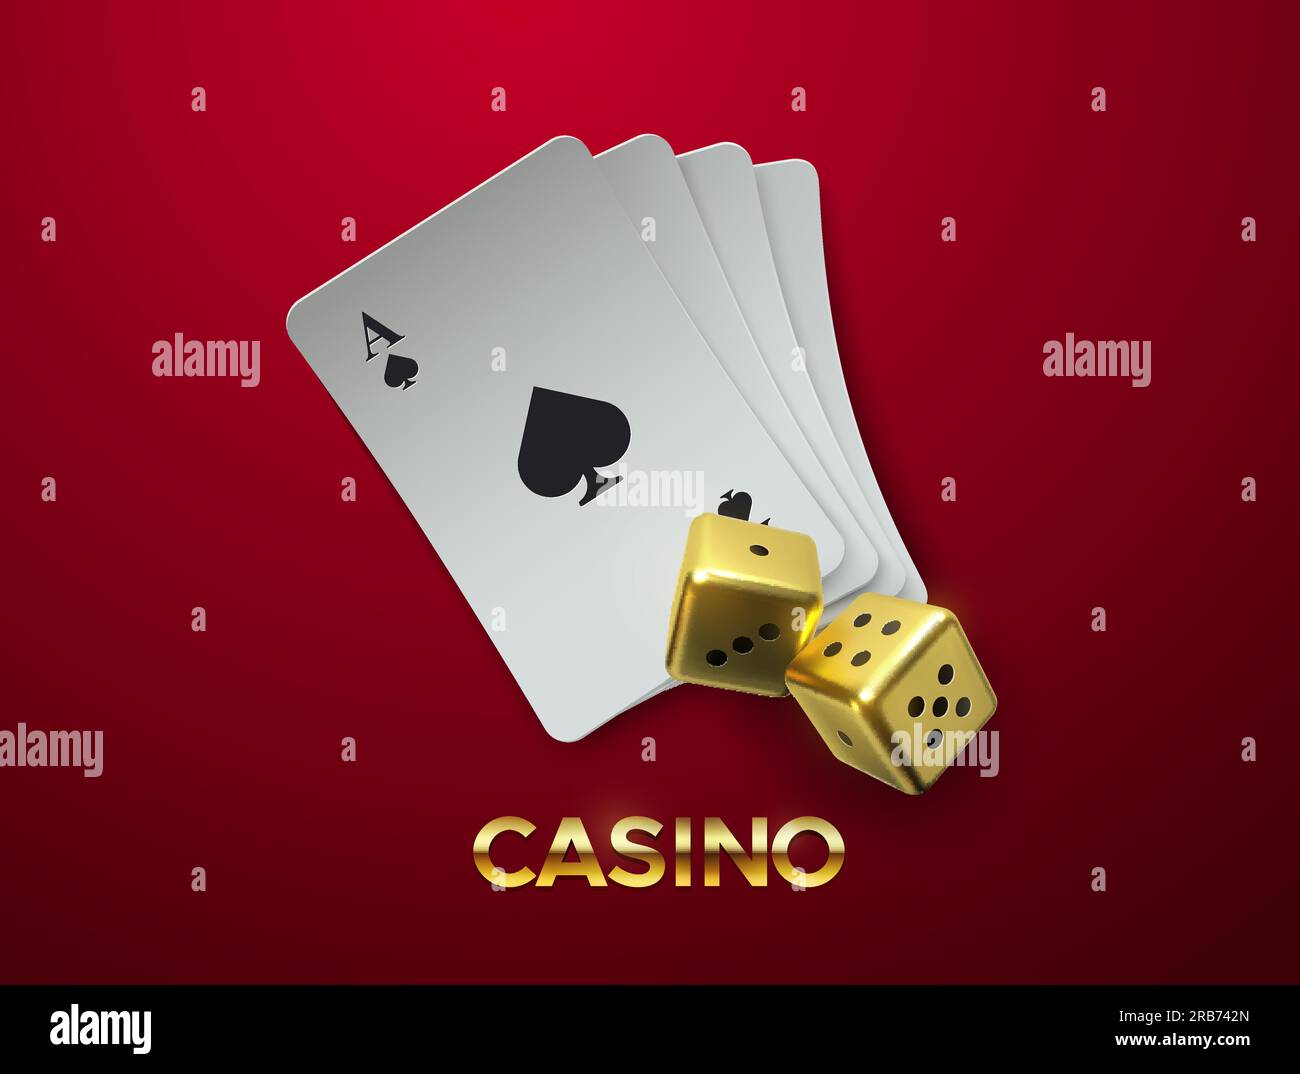 Casino concept of golden dices and playing cards stack isolated on red background Stock Vector